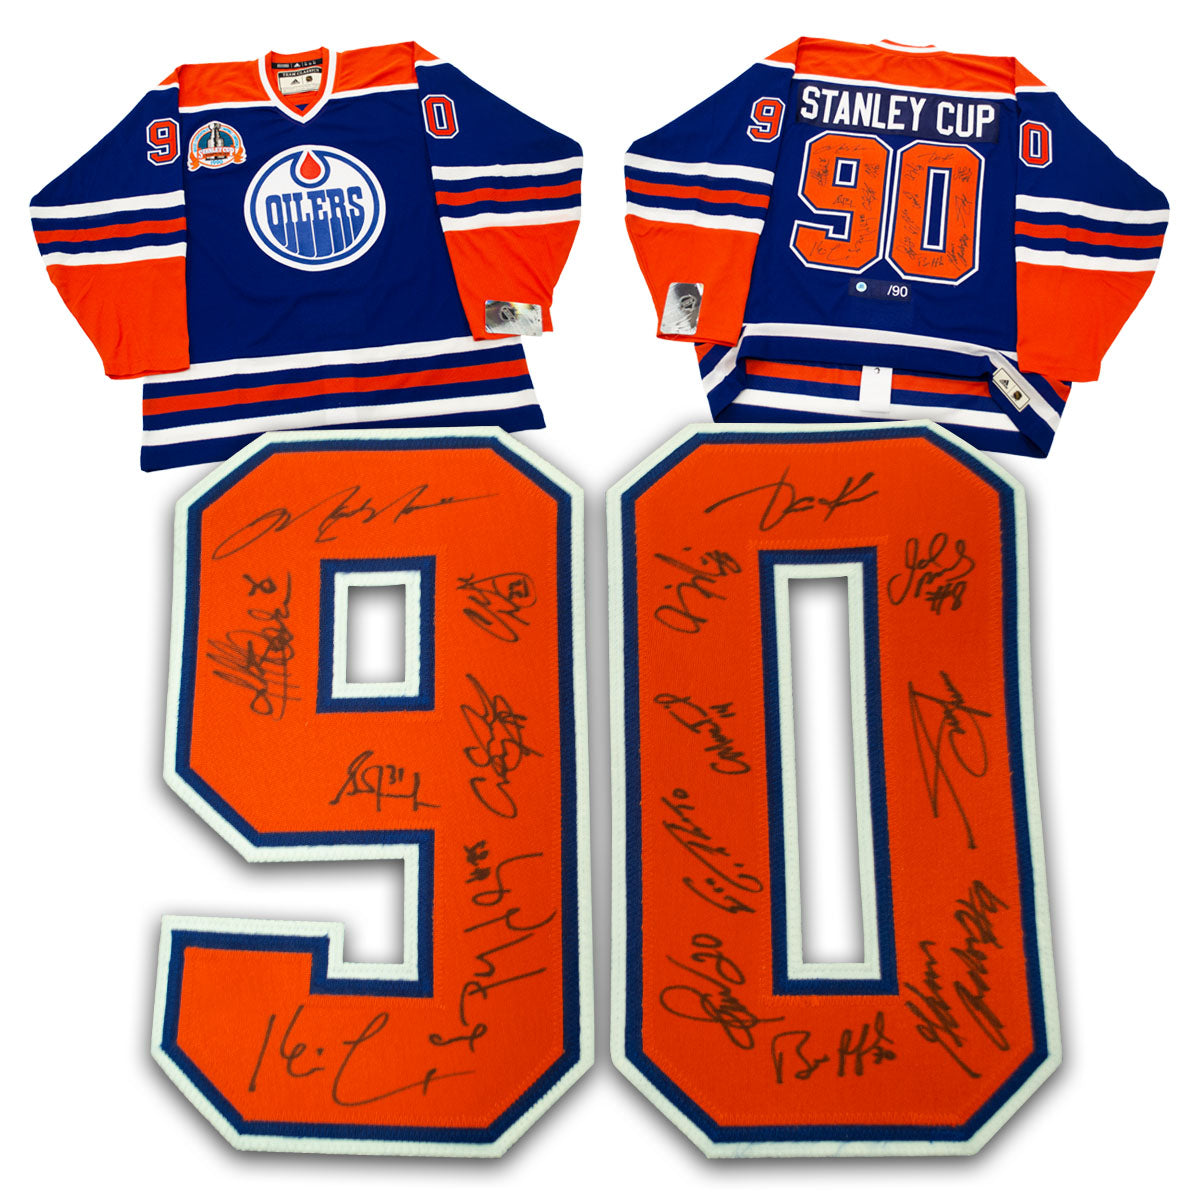 1990 Edmonton Oilers 16 Player Team Signed Stanley Cup Vintage Jersey /90